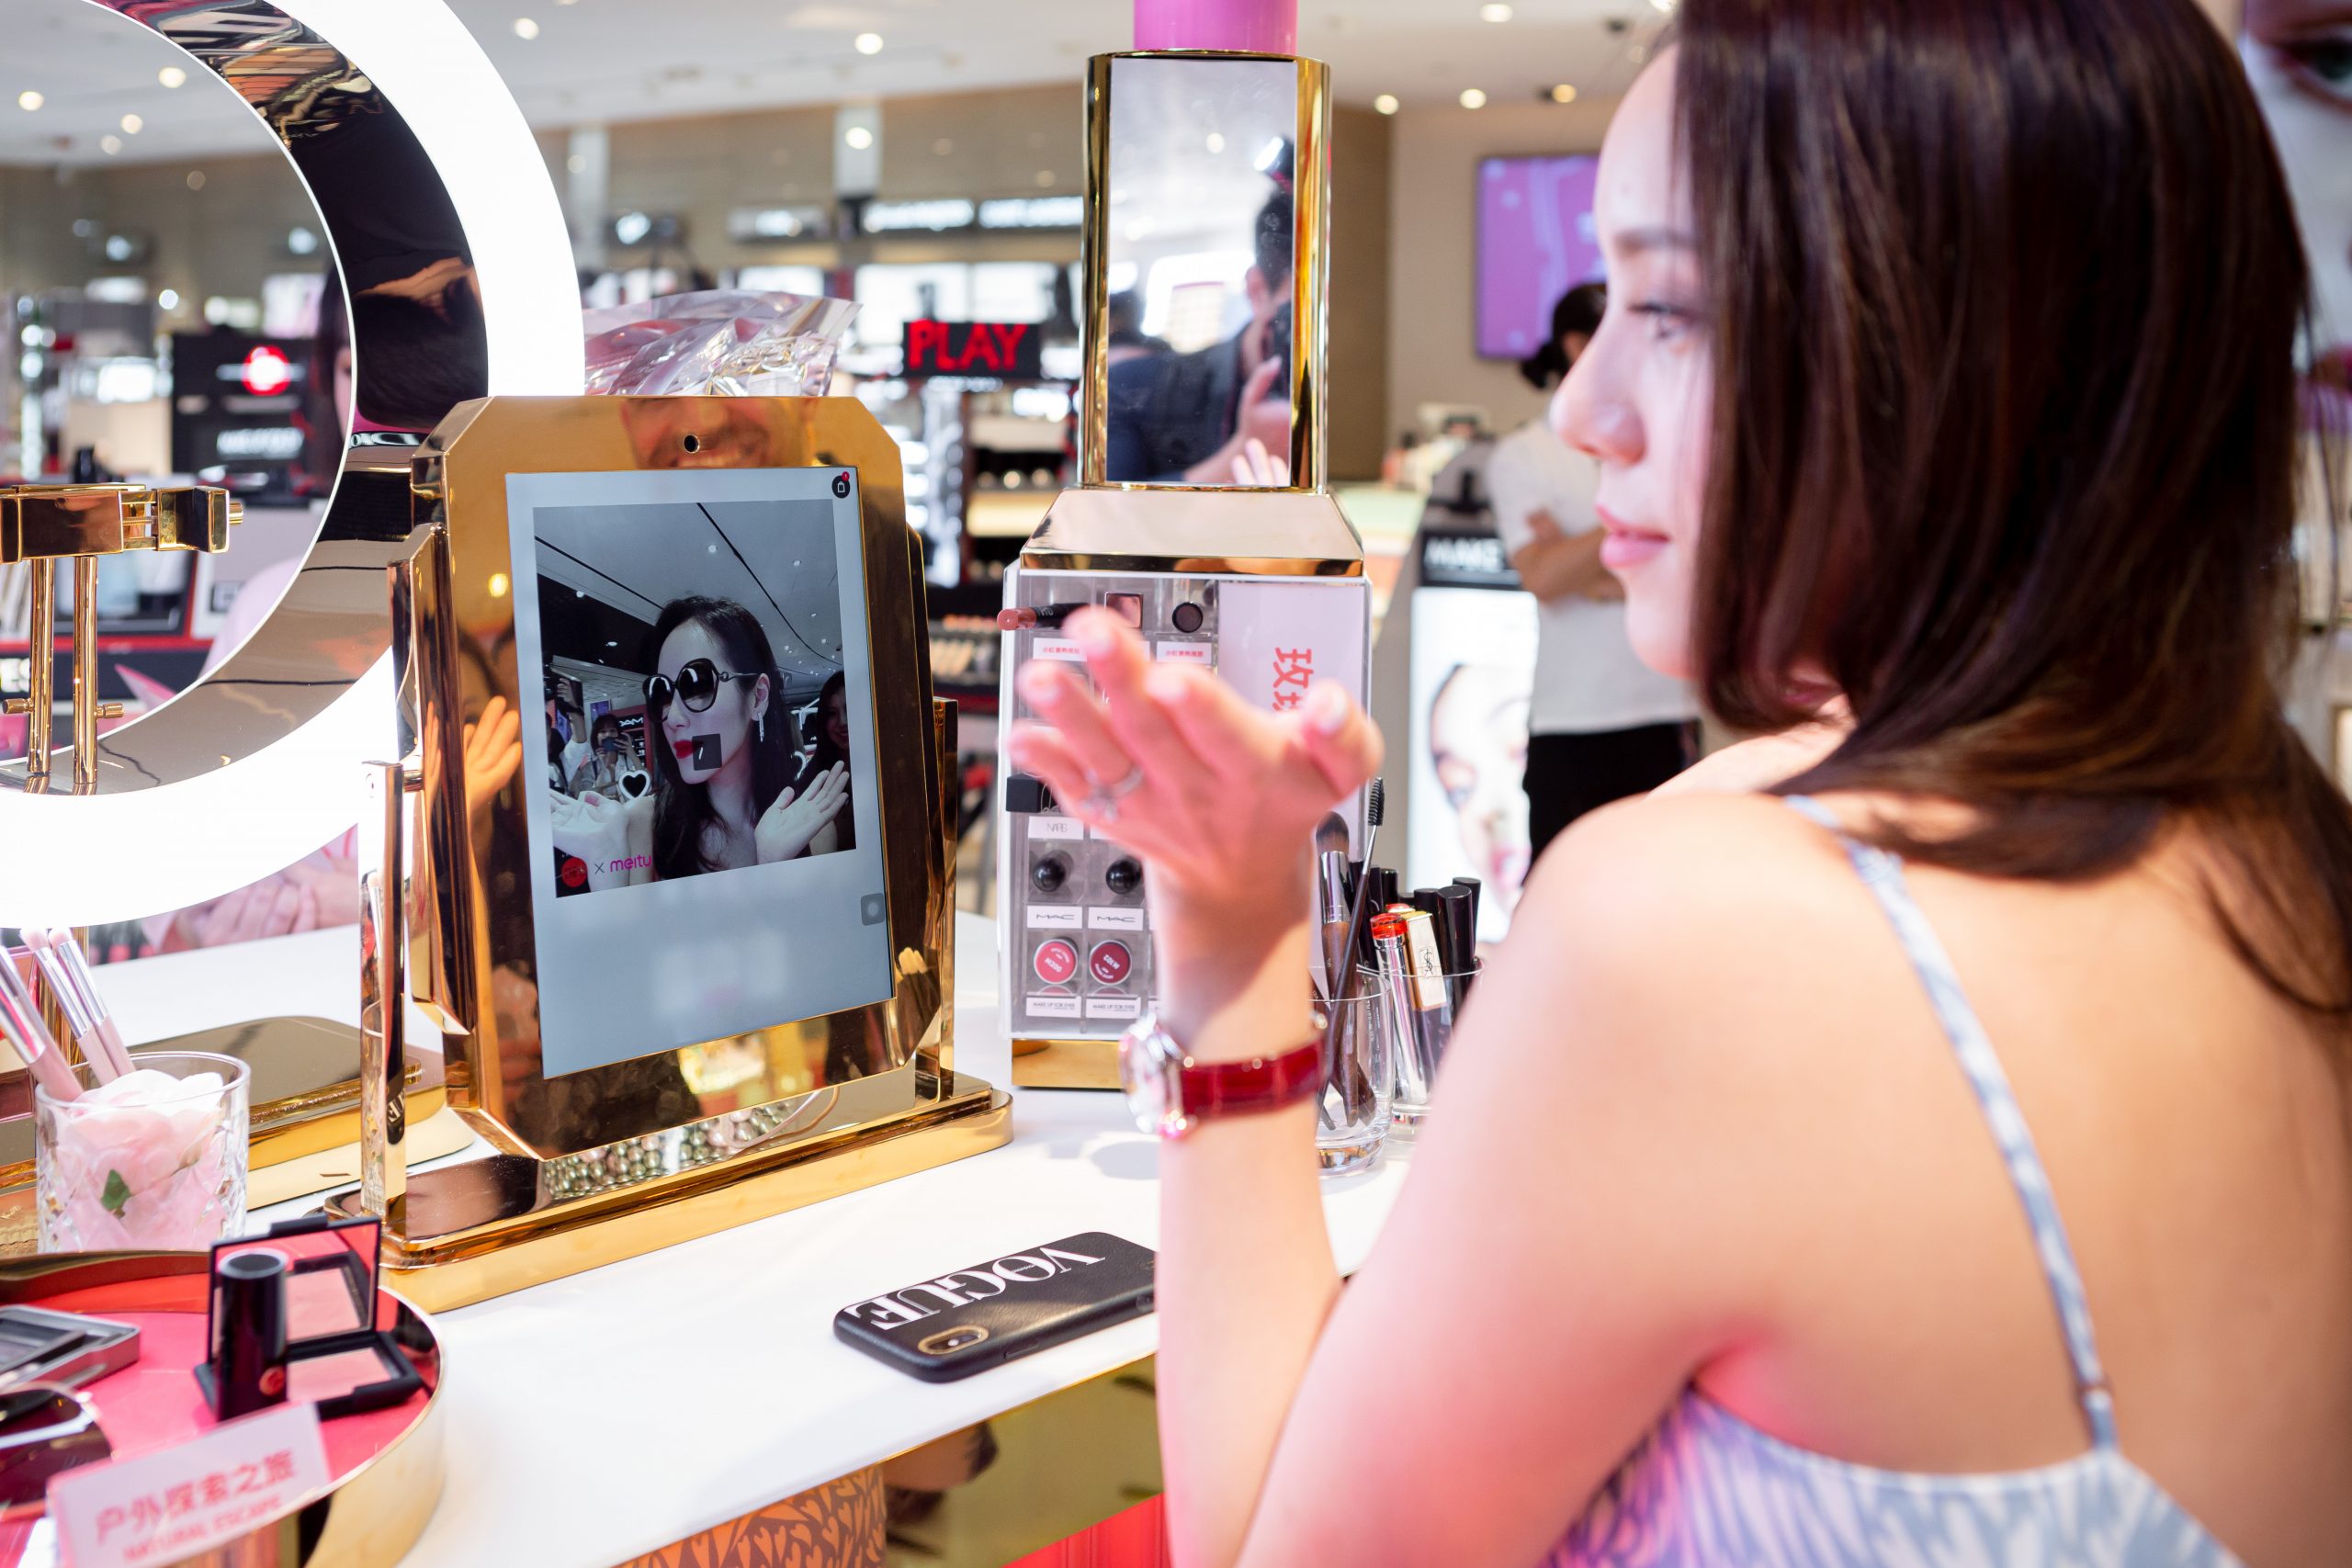 Chinese tech companies bring virtual makeup systems to support cosmetics retailers hit by COVID-19 pandemic